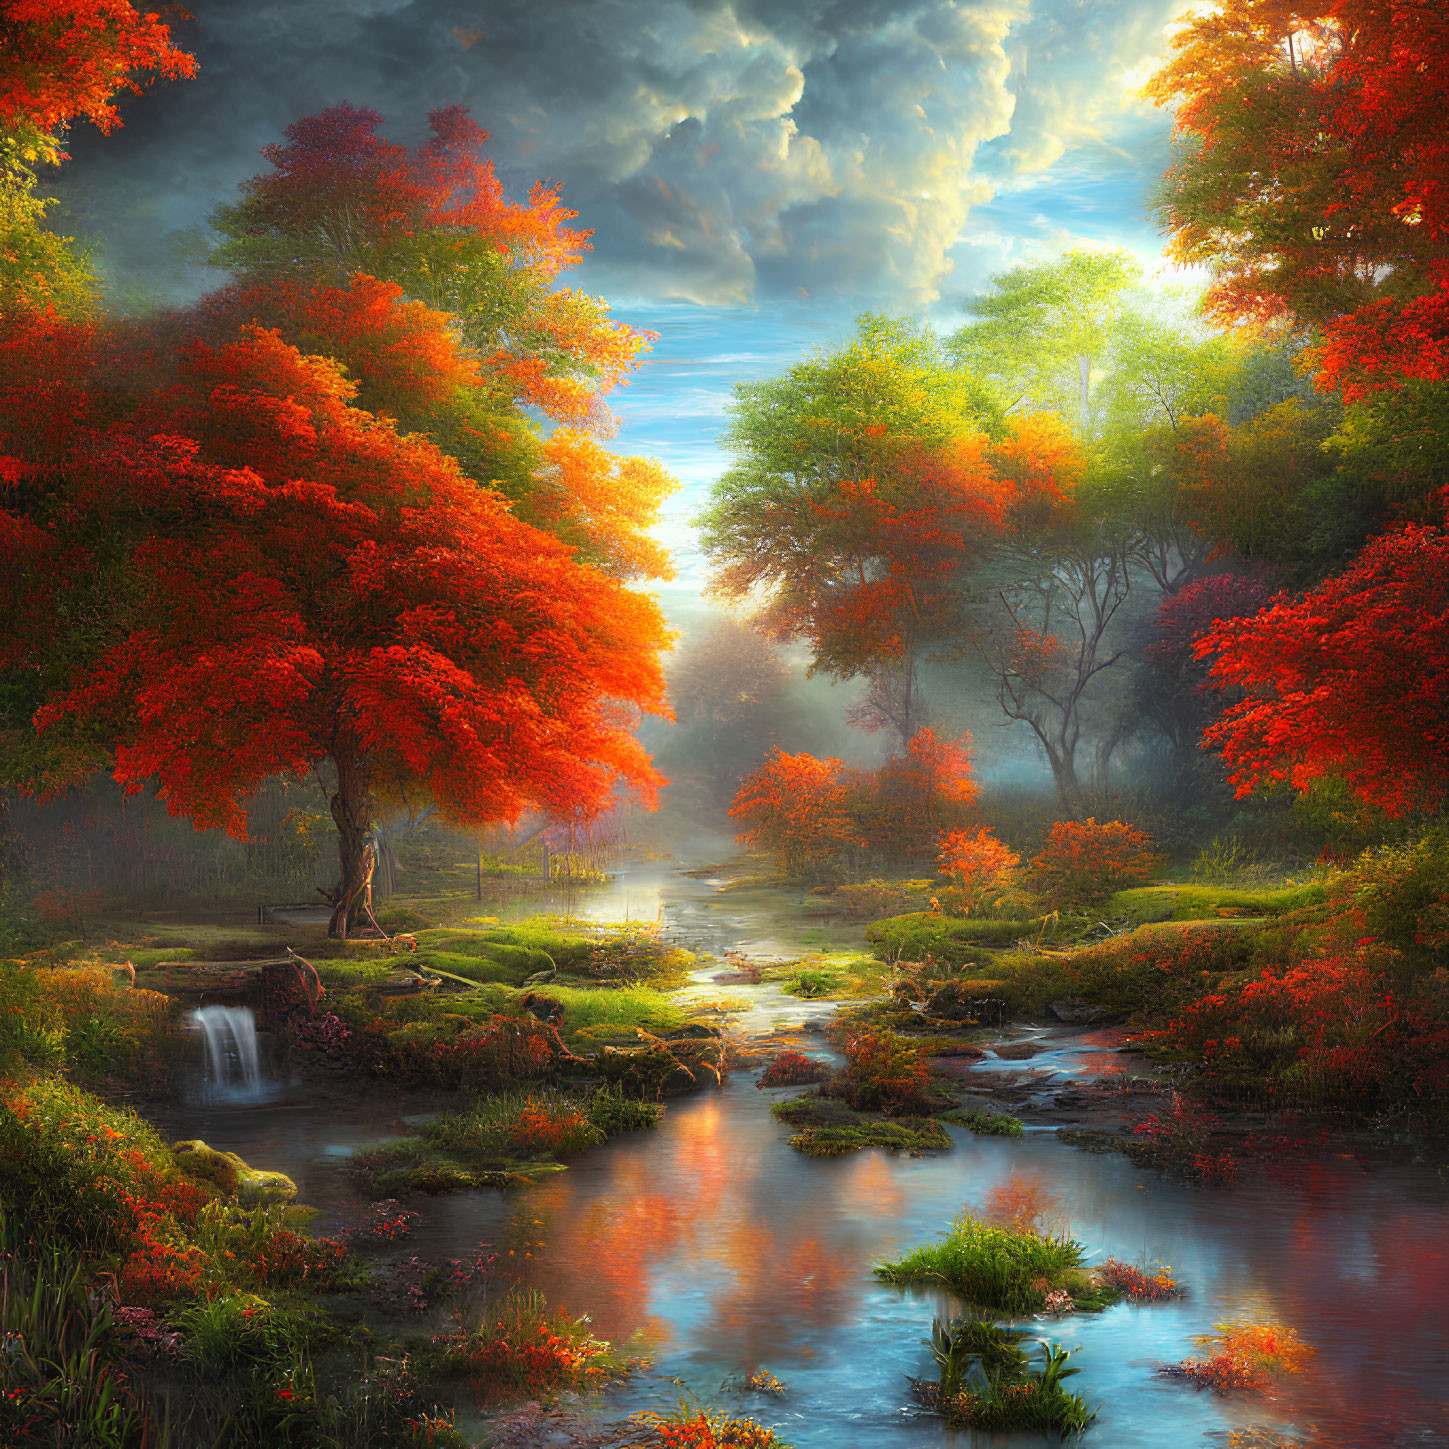 Tranquil autumn landscape with red-orange trees, stream, waterfall